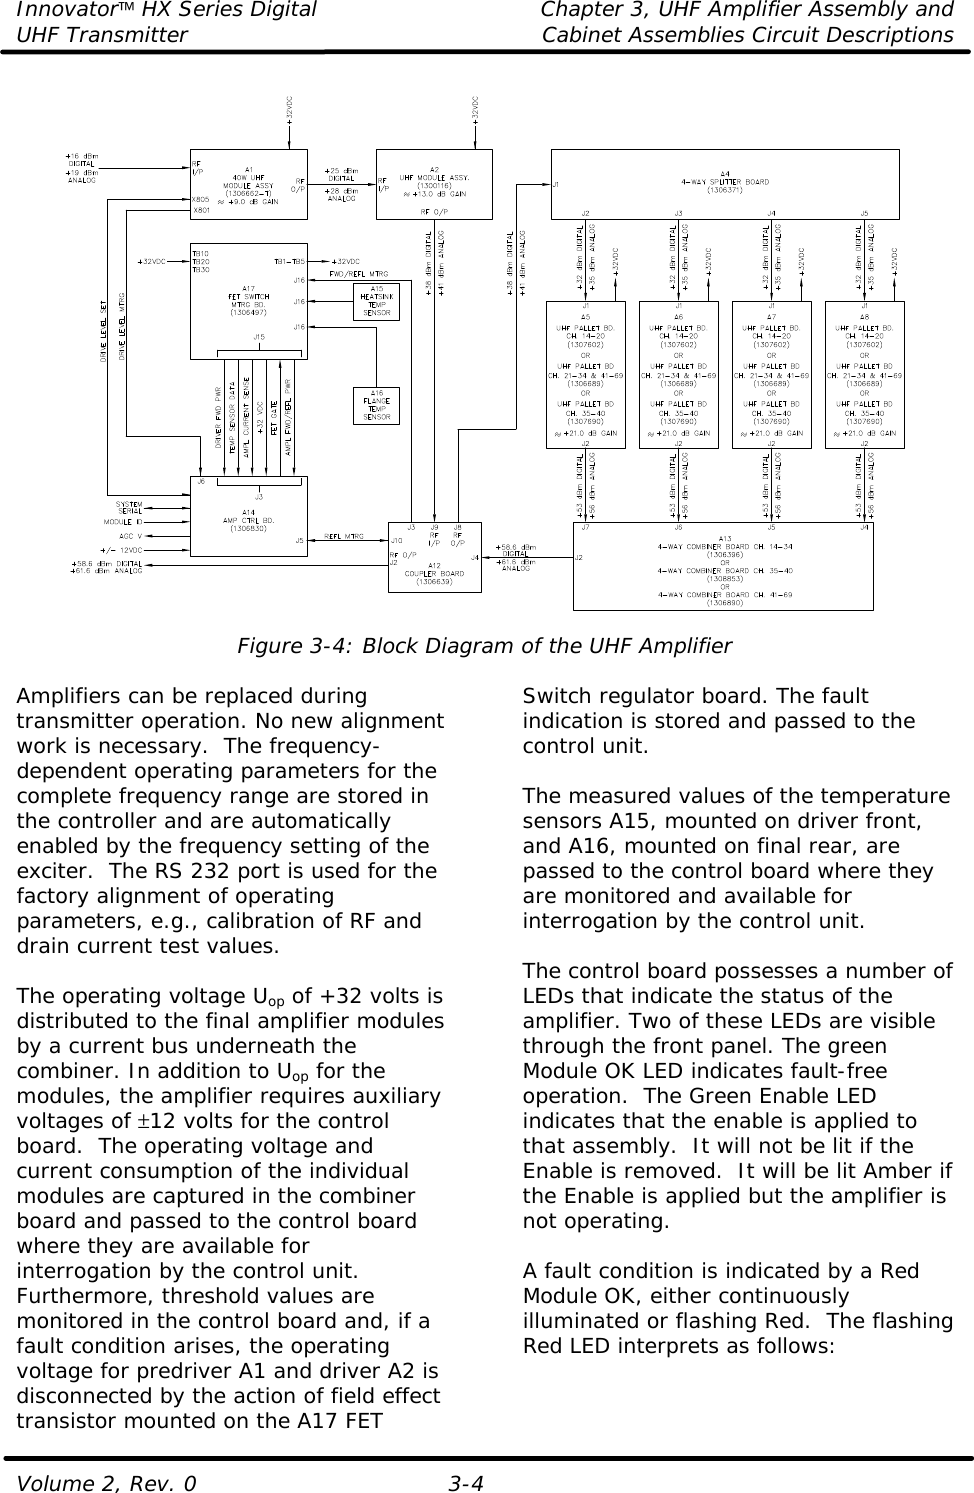 Innovator HX Series Digital Chapter 3, UHF Amplifier Assembly and UHF Transmitter Cabinet Assemblies Circuit Descriptions  Volume 2, Rev. 0 3-4  Figure 3-4: Block Diagram of the UHF Amplifier  Amplifiers can be replaced during transmitter operation. No new alignment work is necessary.  The frequency-dependent operating parameters for the complete frequency range are stored in the controller and are automatically enabled by the frequency setting of the exciter.  The RS 232 port is used for the factory alignment of operating parameters, e.g., calibration of RF and drain current test values.   The operating voltage Uop of +32 volts is distributed to the final amplifier modules by a current bus underneath the combiner. In addition to Uop for the modules, the amplifier requires auxiliary voltages of ±12 volts for the control board.  The operating voltage and current consumption of the individual modules are captured in the combiner board and passed to the control board where they are available for interrogation by the control unit. Furthermore, threshold values are monitored in the control board and, if a fault condition arises, the operating voltage for predriver A1 and driver A2 is disconnected by the action of field effect transistor mounted on the A17 FET Switch regulator board. The fault indication is stored and passed to the control unit.   The measured values of the temperature sensors A15, mounted on driver front, and A16, mounted on final rear, are passed to the control board where they are monitored and available for interrogation by the control unit.  The control board possesses a number of LEDs that indicate the status of the amplifier. Two of these LEDs are visible through the front panel. The green Module OK LED indicates fault-free operation.  The Green Enable LED indicates that the enable is applied to that assembly.  It will not be lit if the Enable is removed.  It will be lit Amber if the Enable is applied but the amplifier is not operating.  A fault condition is indicated by a Red Module OK, either continuously illuminated or flashing Red.  The flashing Red LED interprets as follows: 